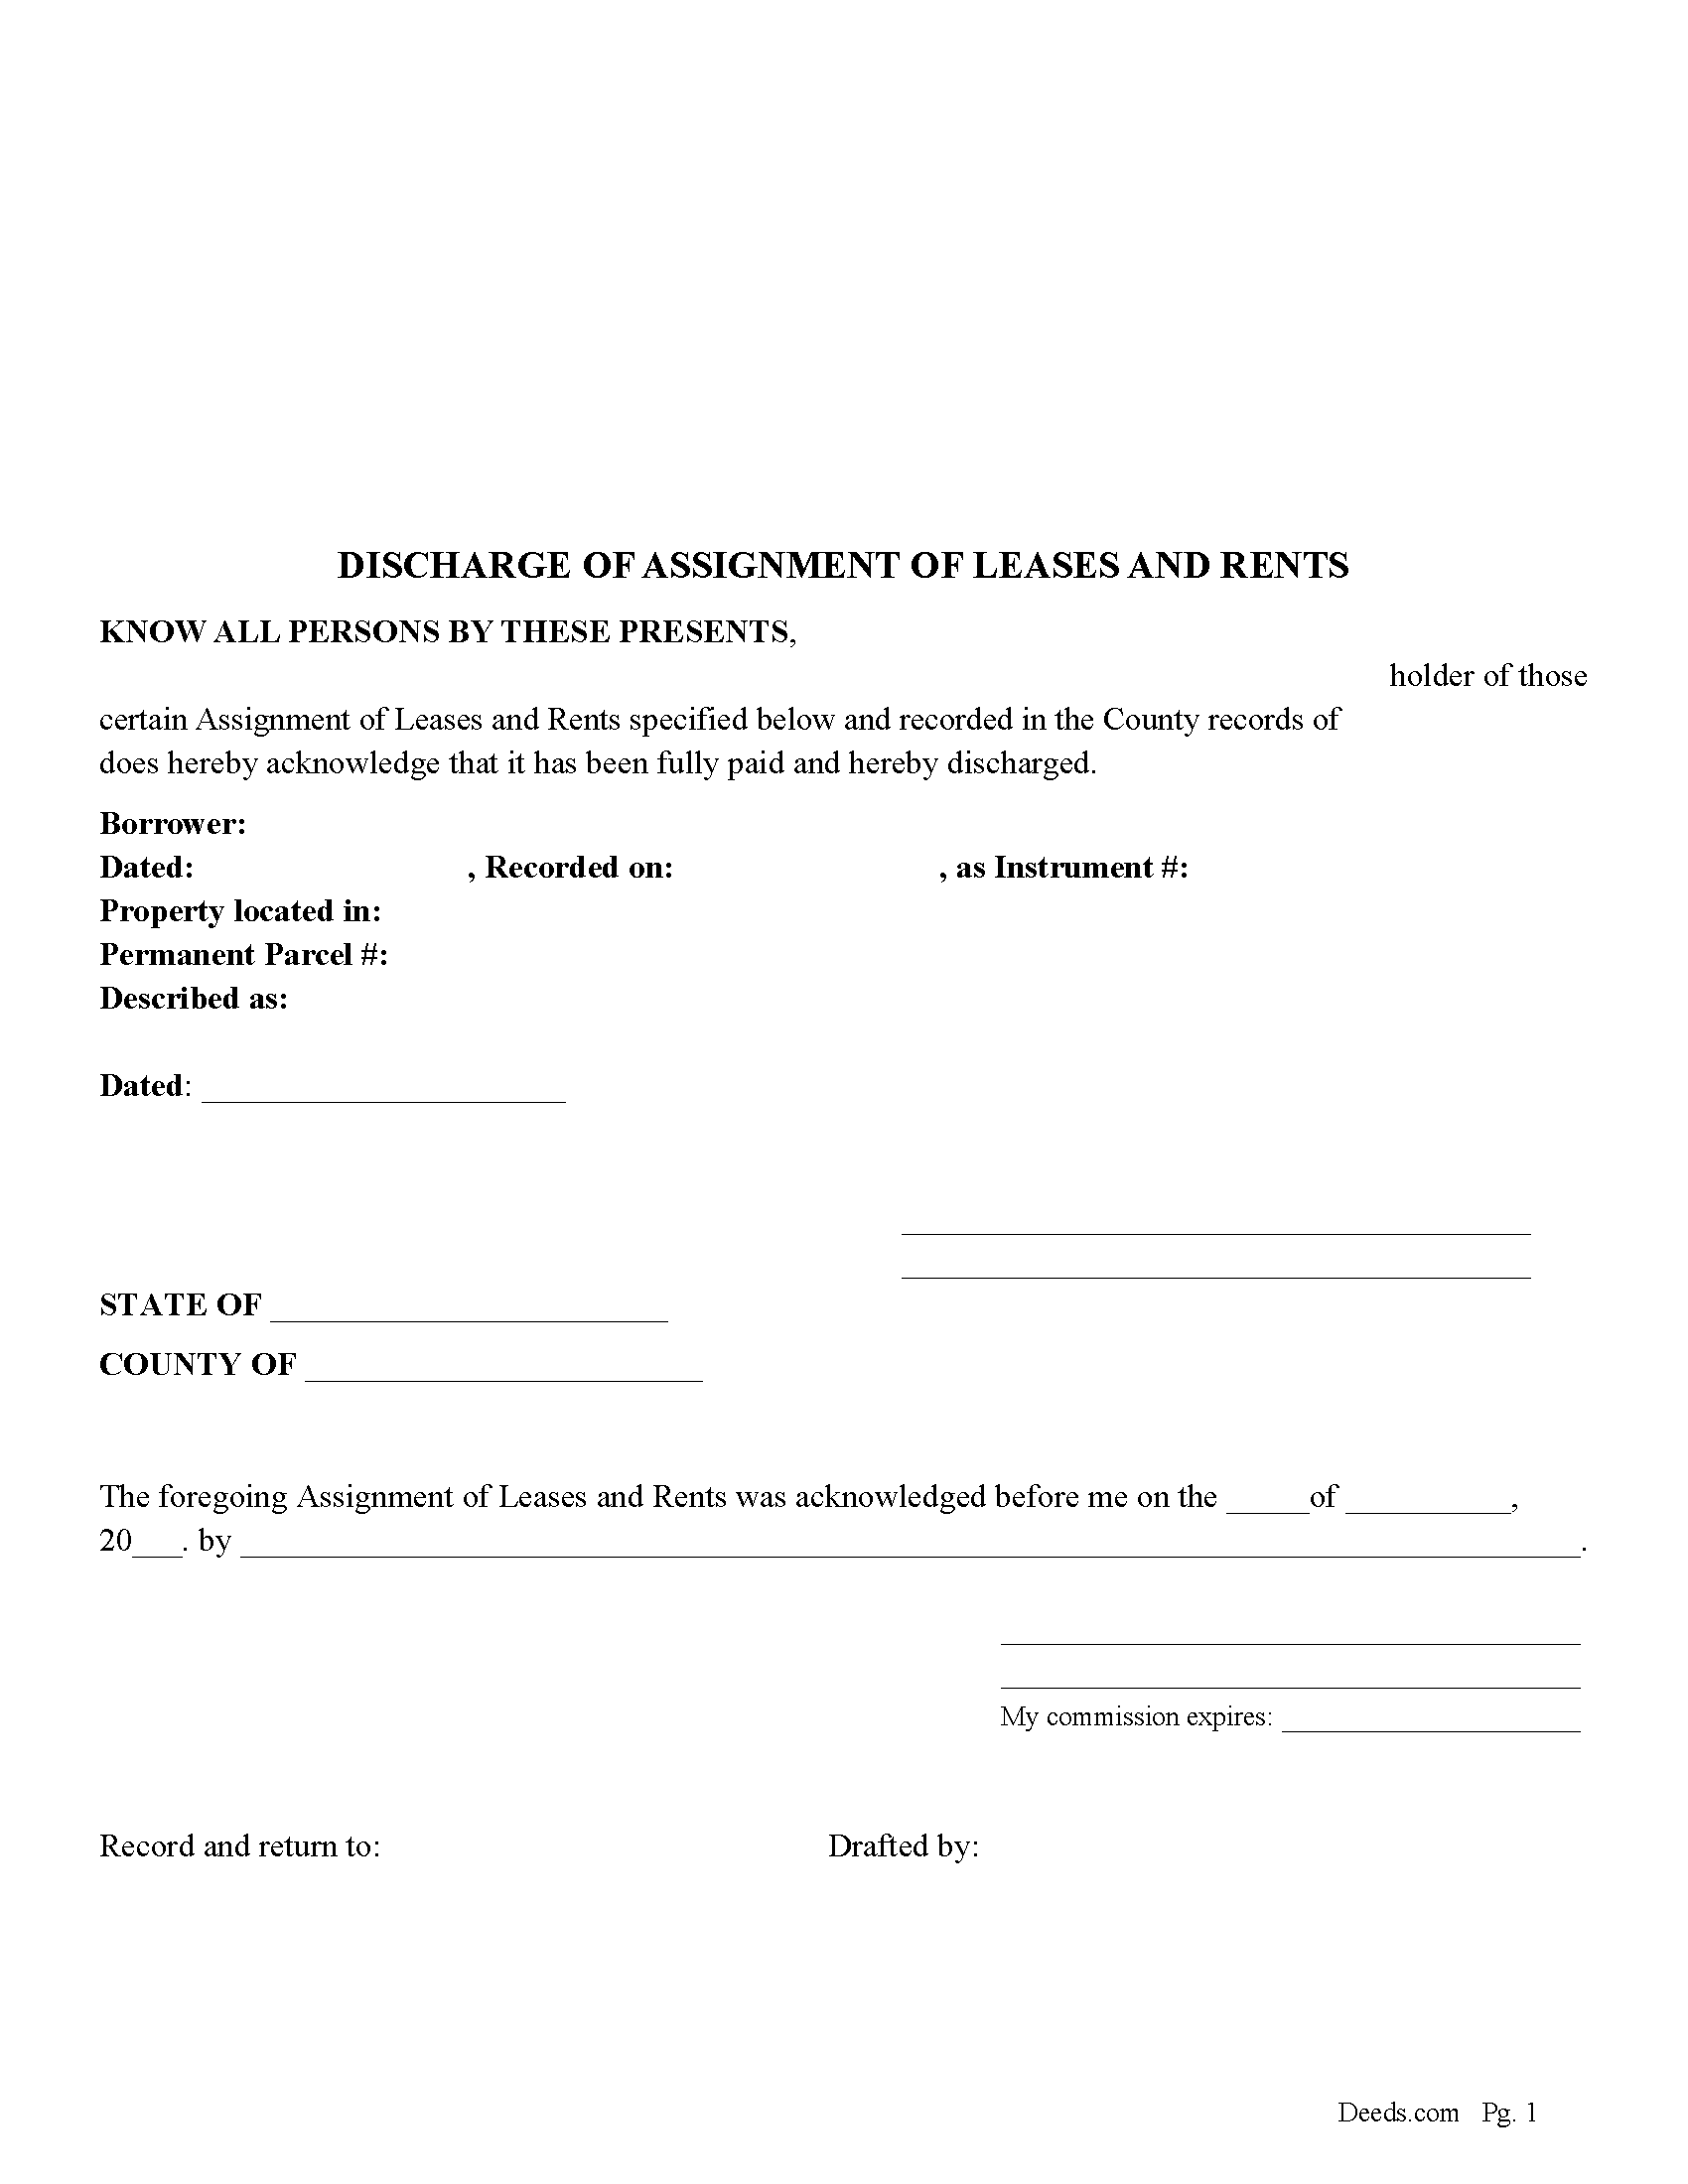 assignment of assignment of leases and rents